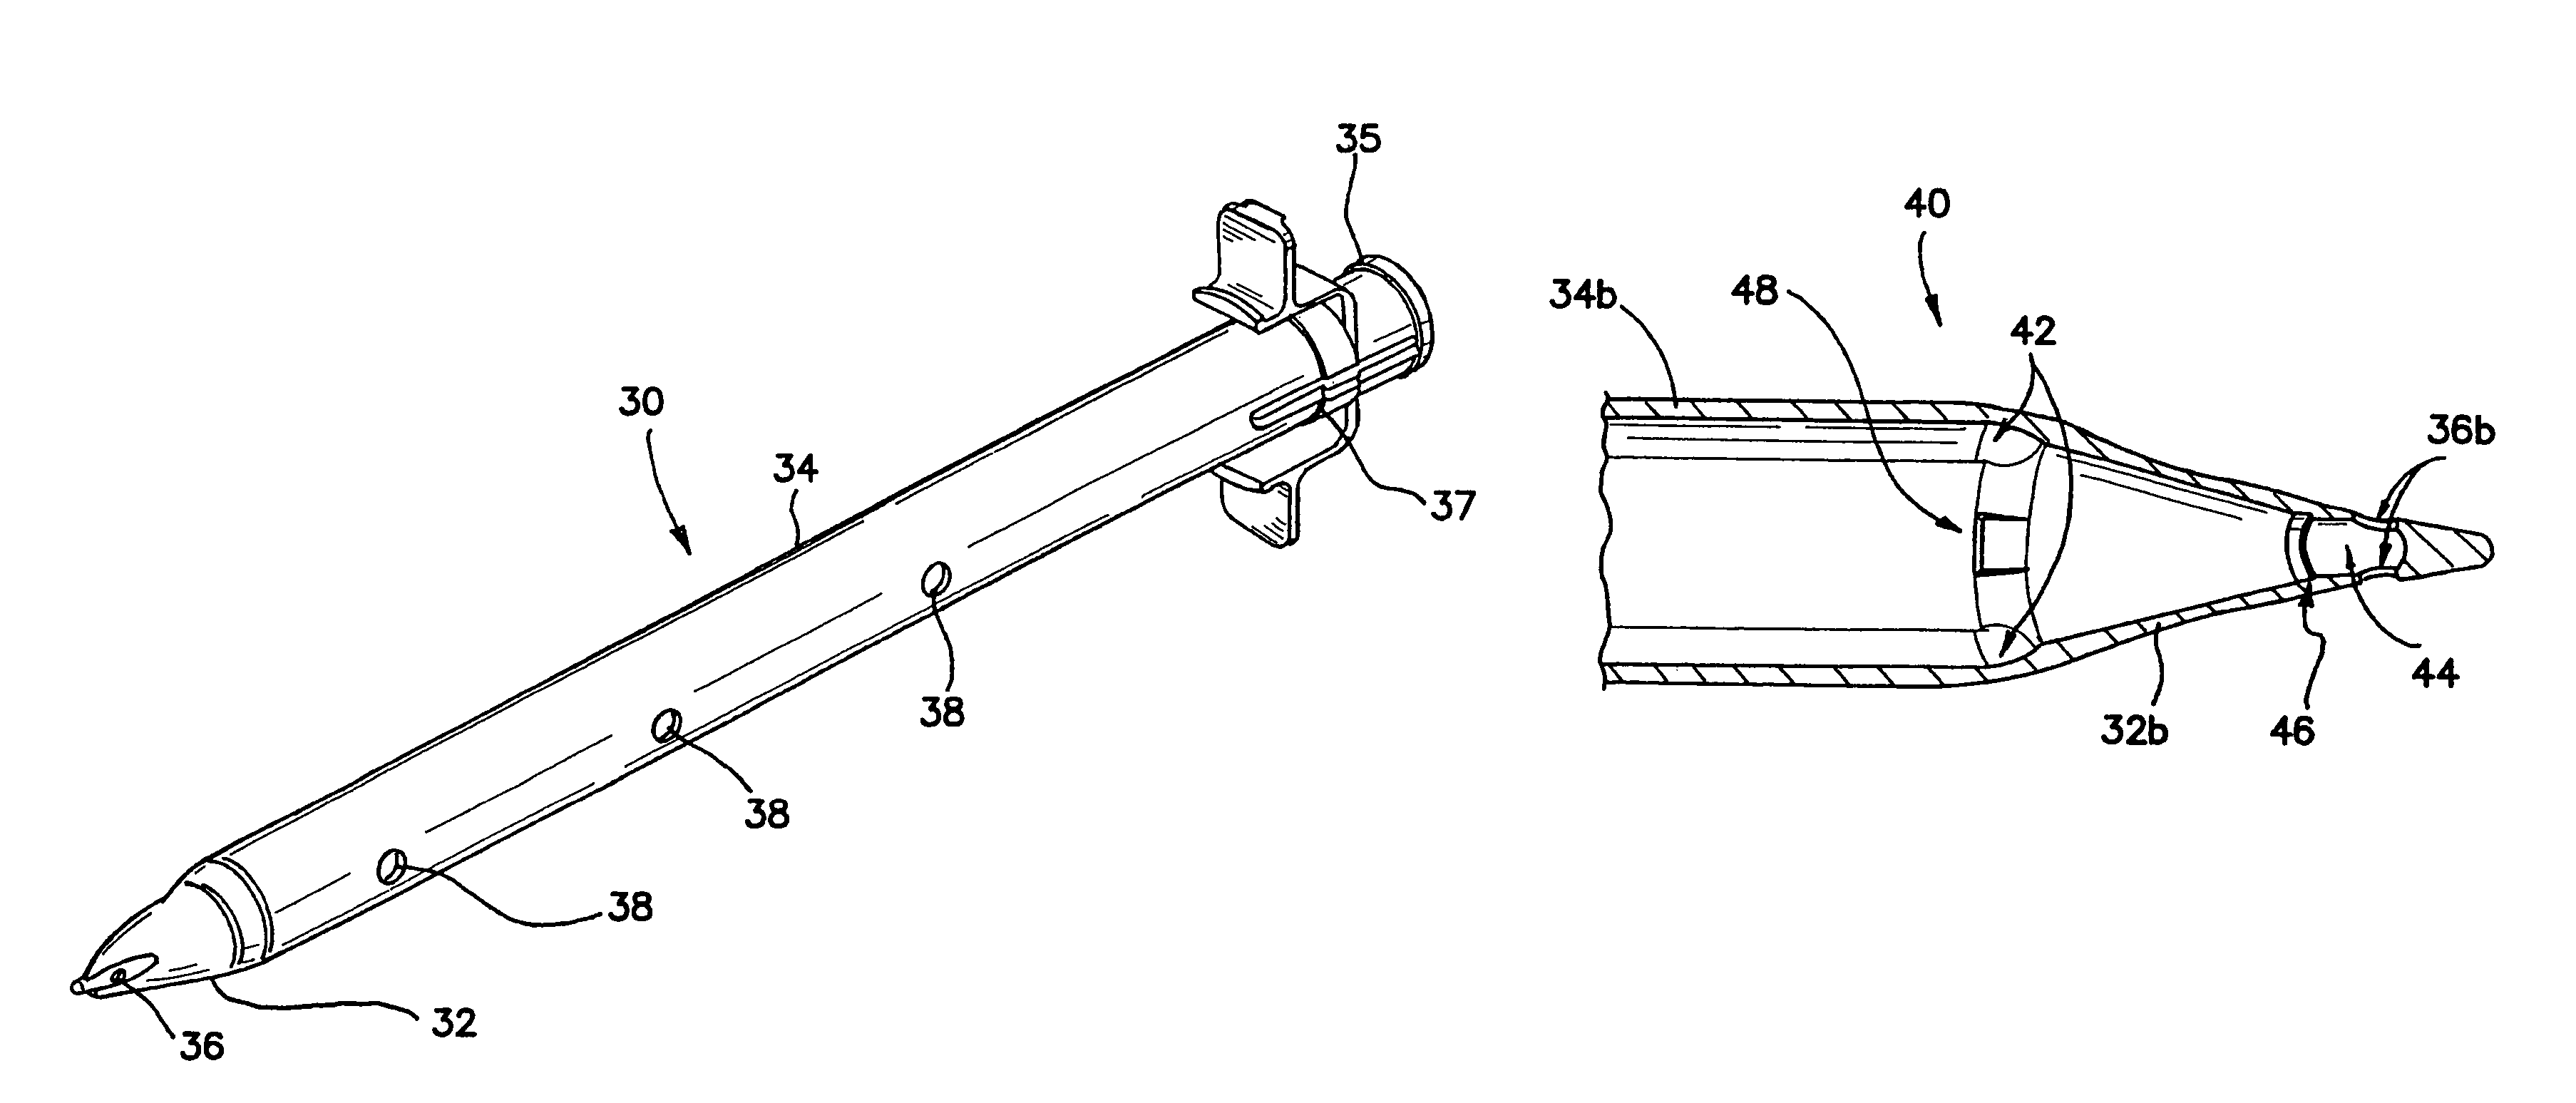 Insufflating optical surgical instrument